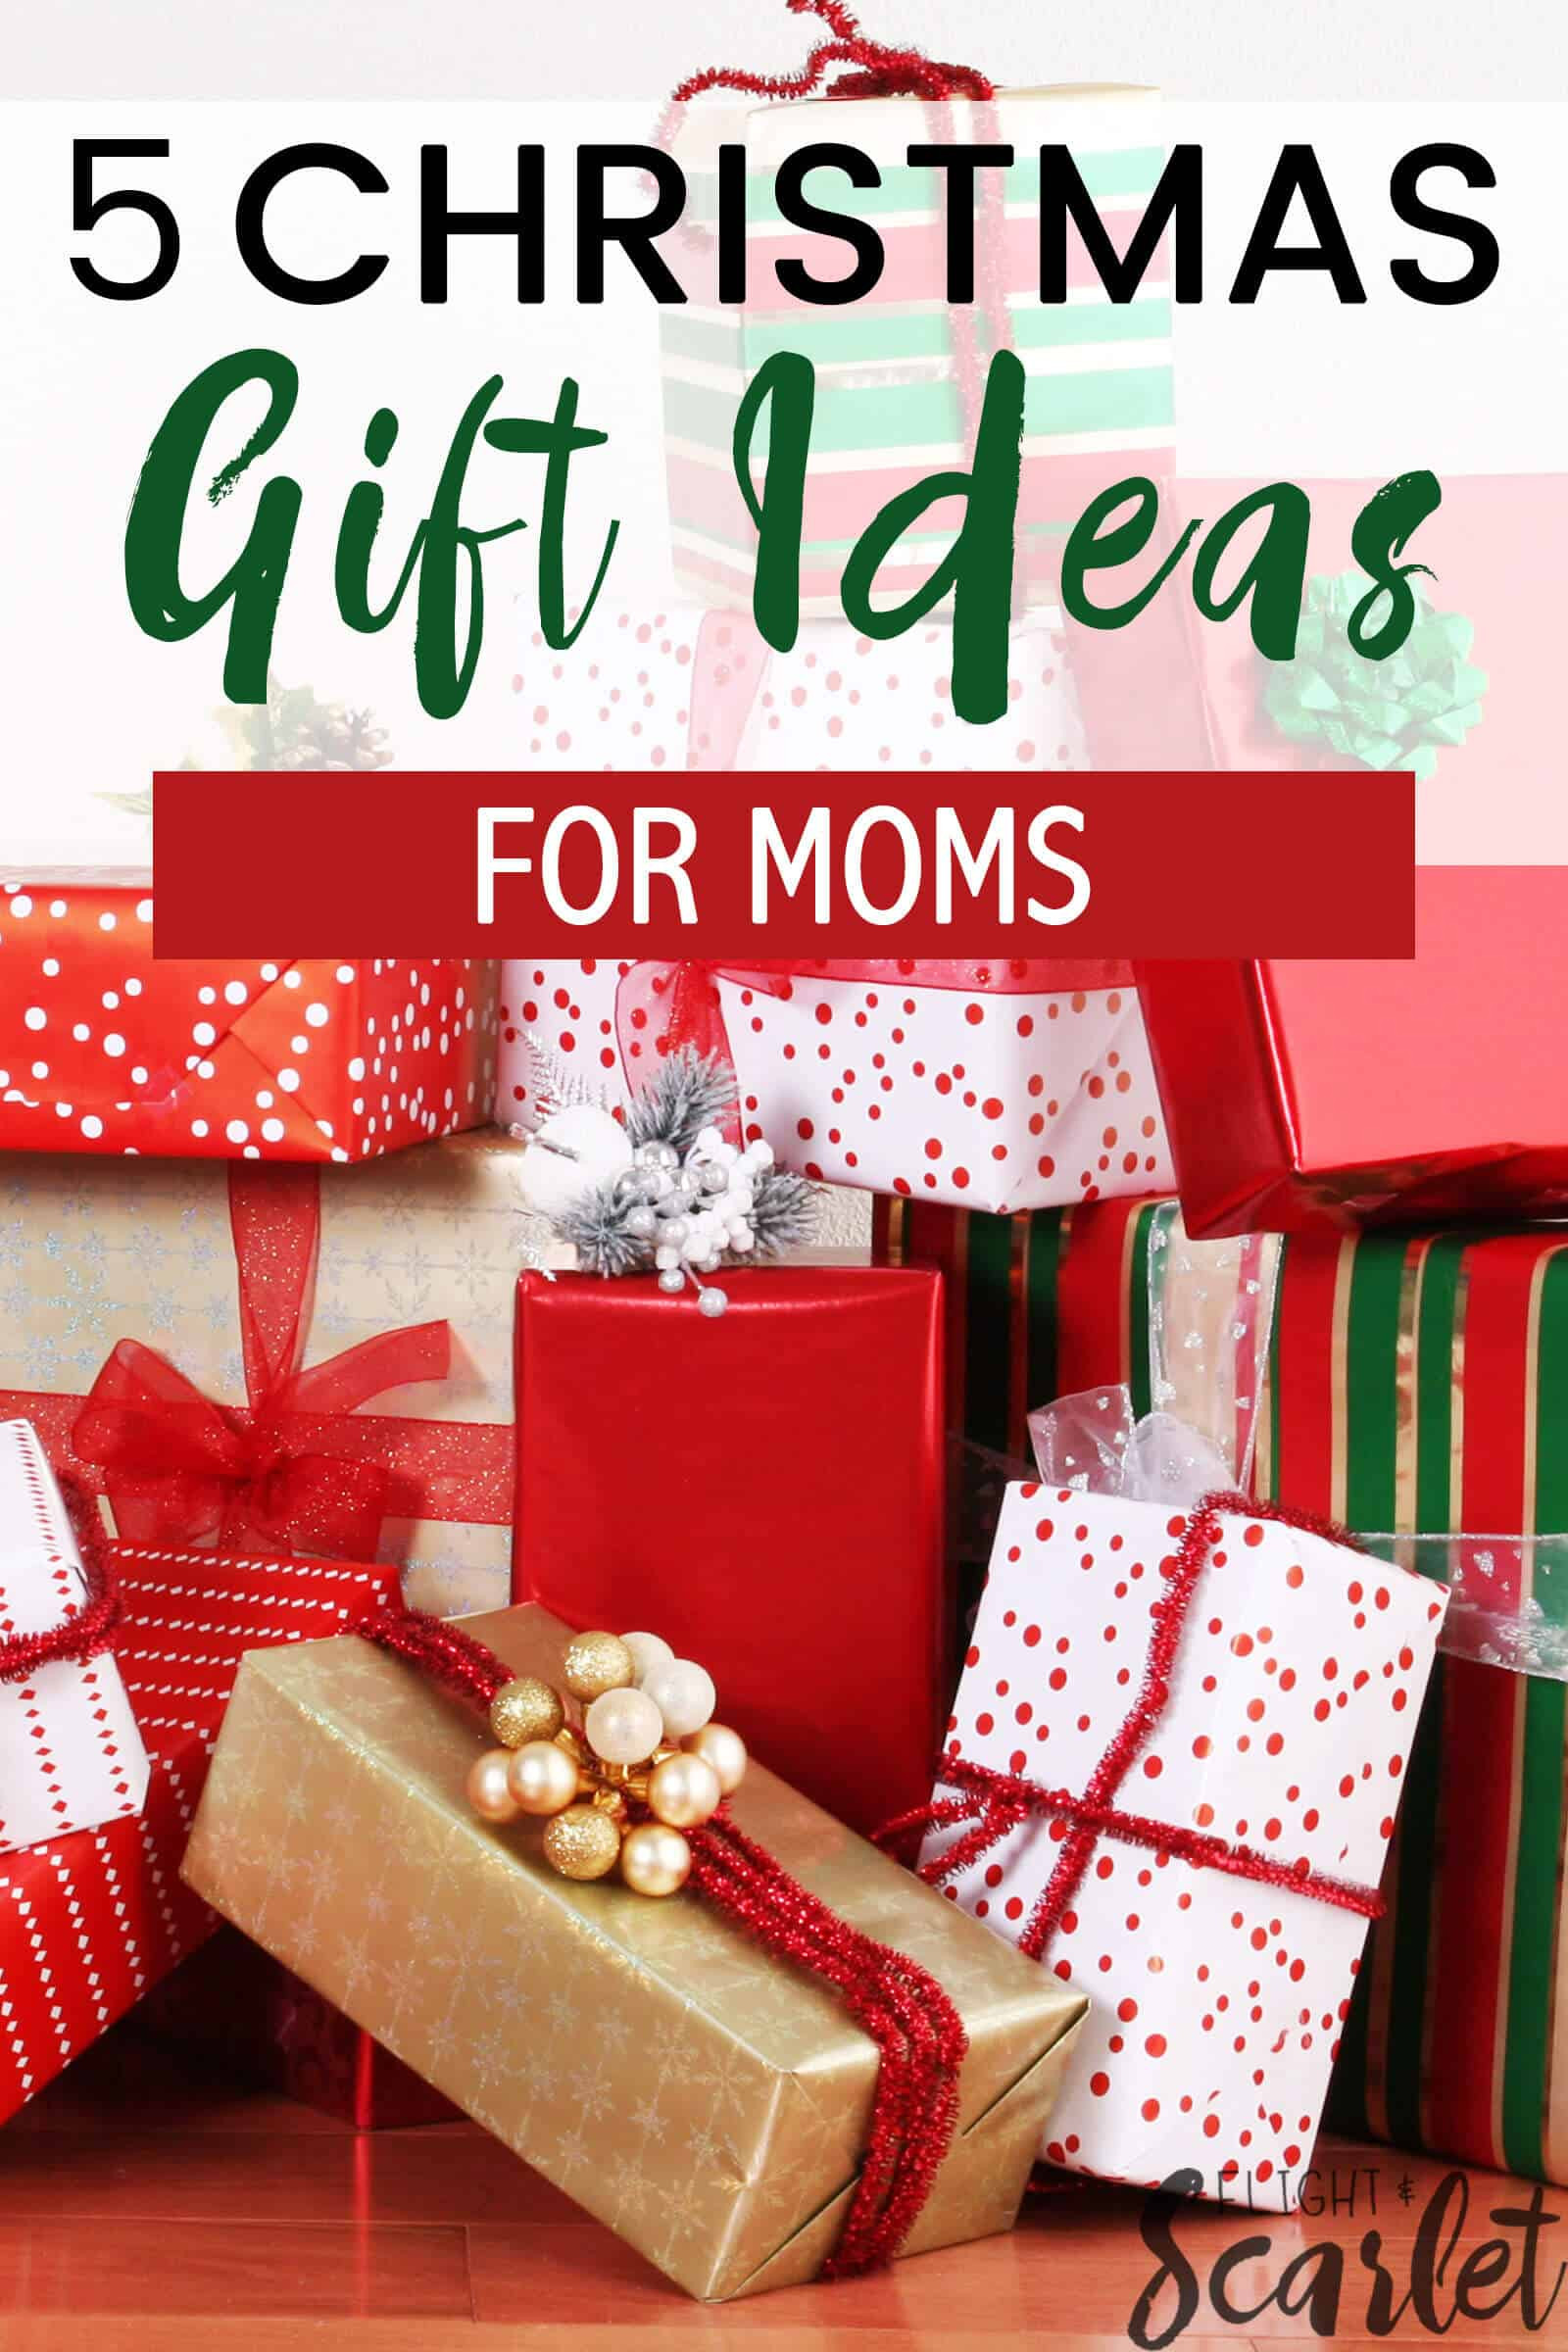 Mother Christmas Gift Ideas
 5 Bud Friendly Gift Ideas For Moms Flight & Scarlet